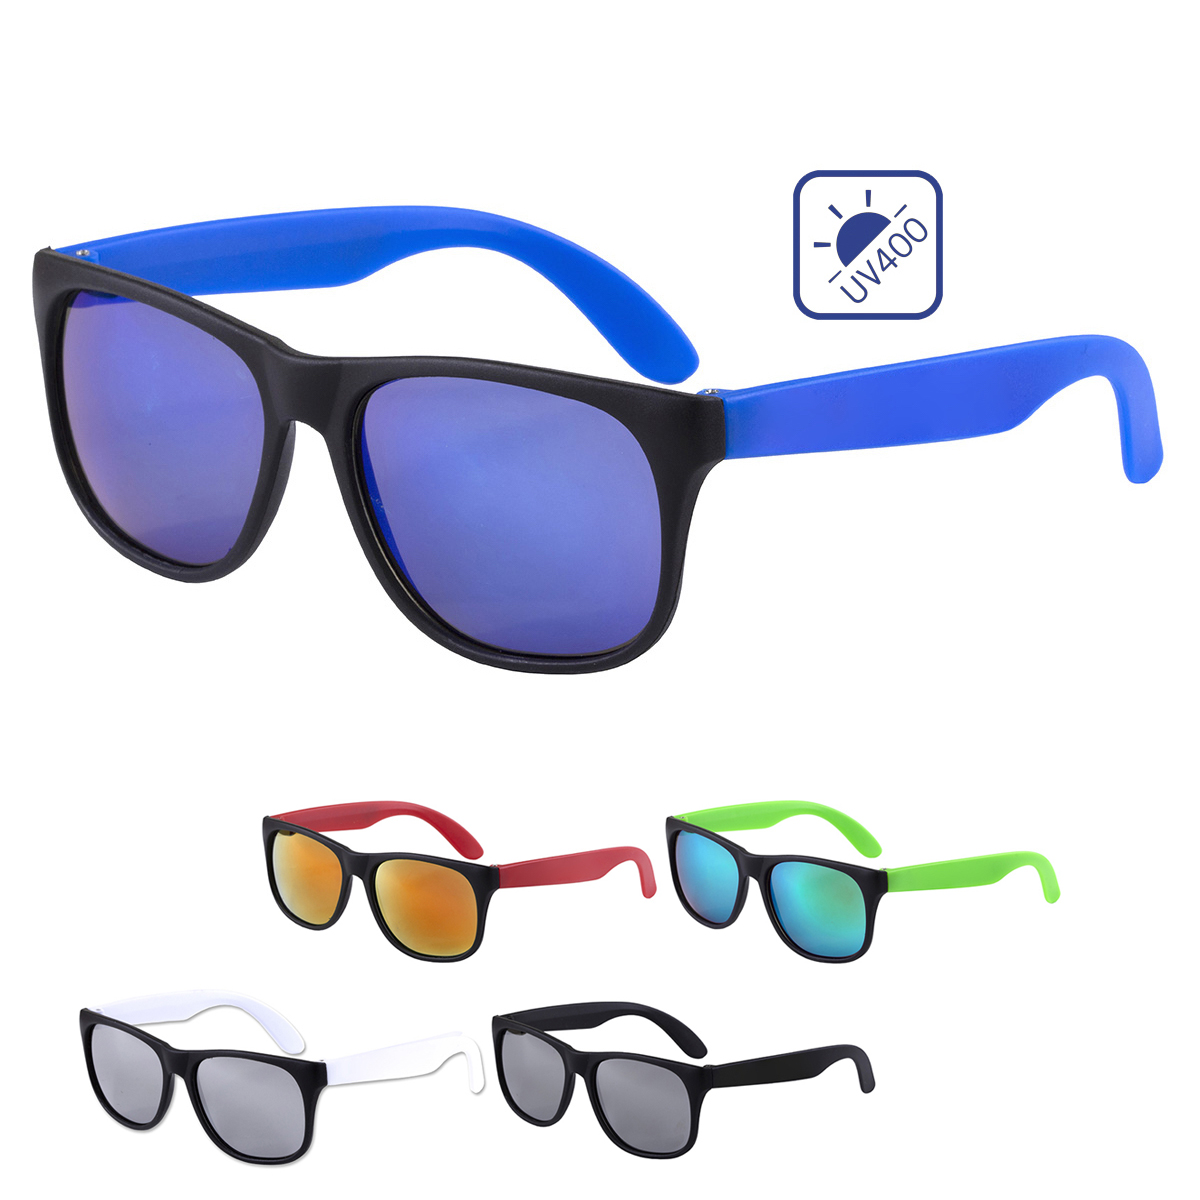 "Newport Tint" Colored Mirror Tint Lens Sunglasses with Mattte Frame